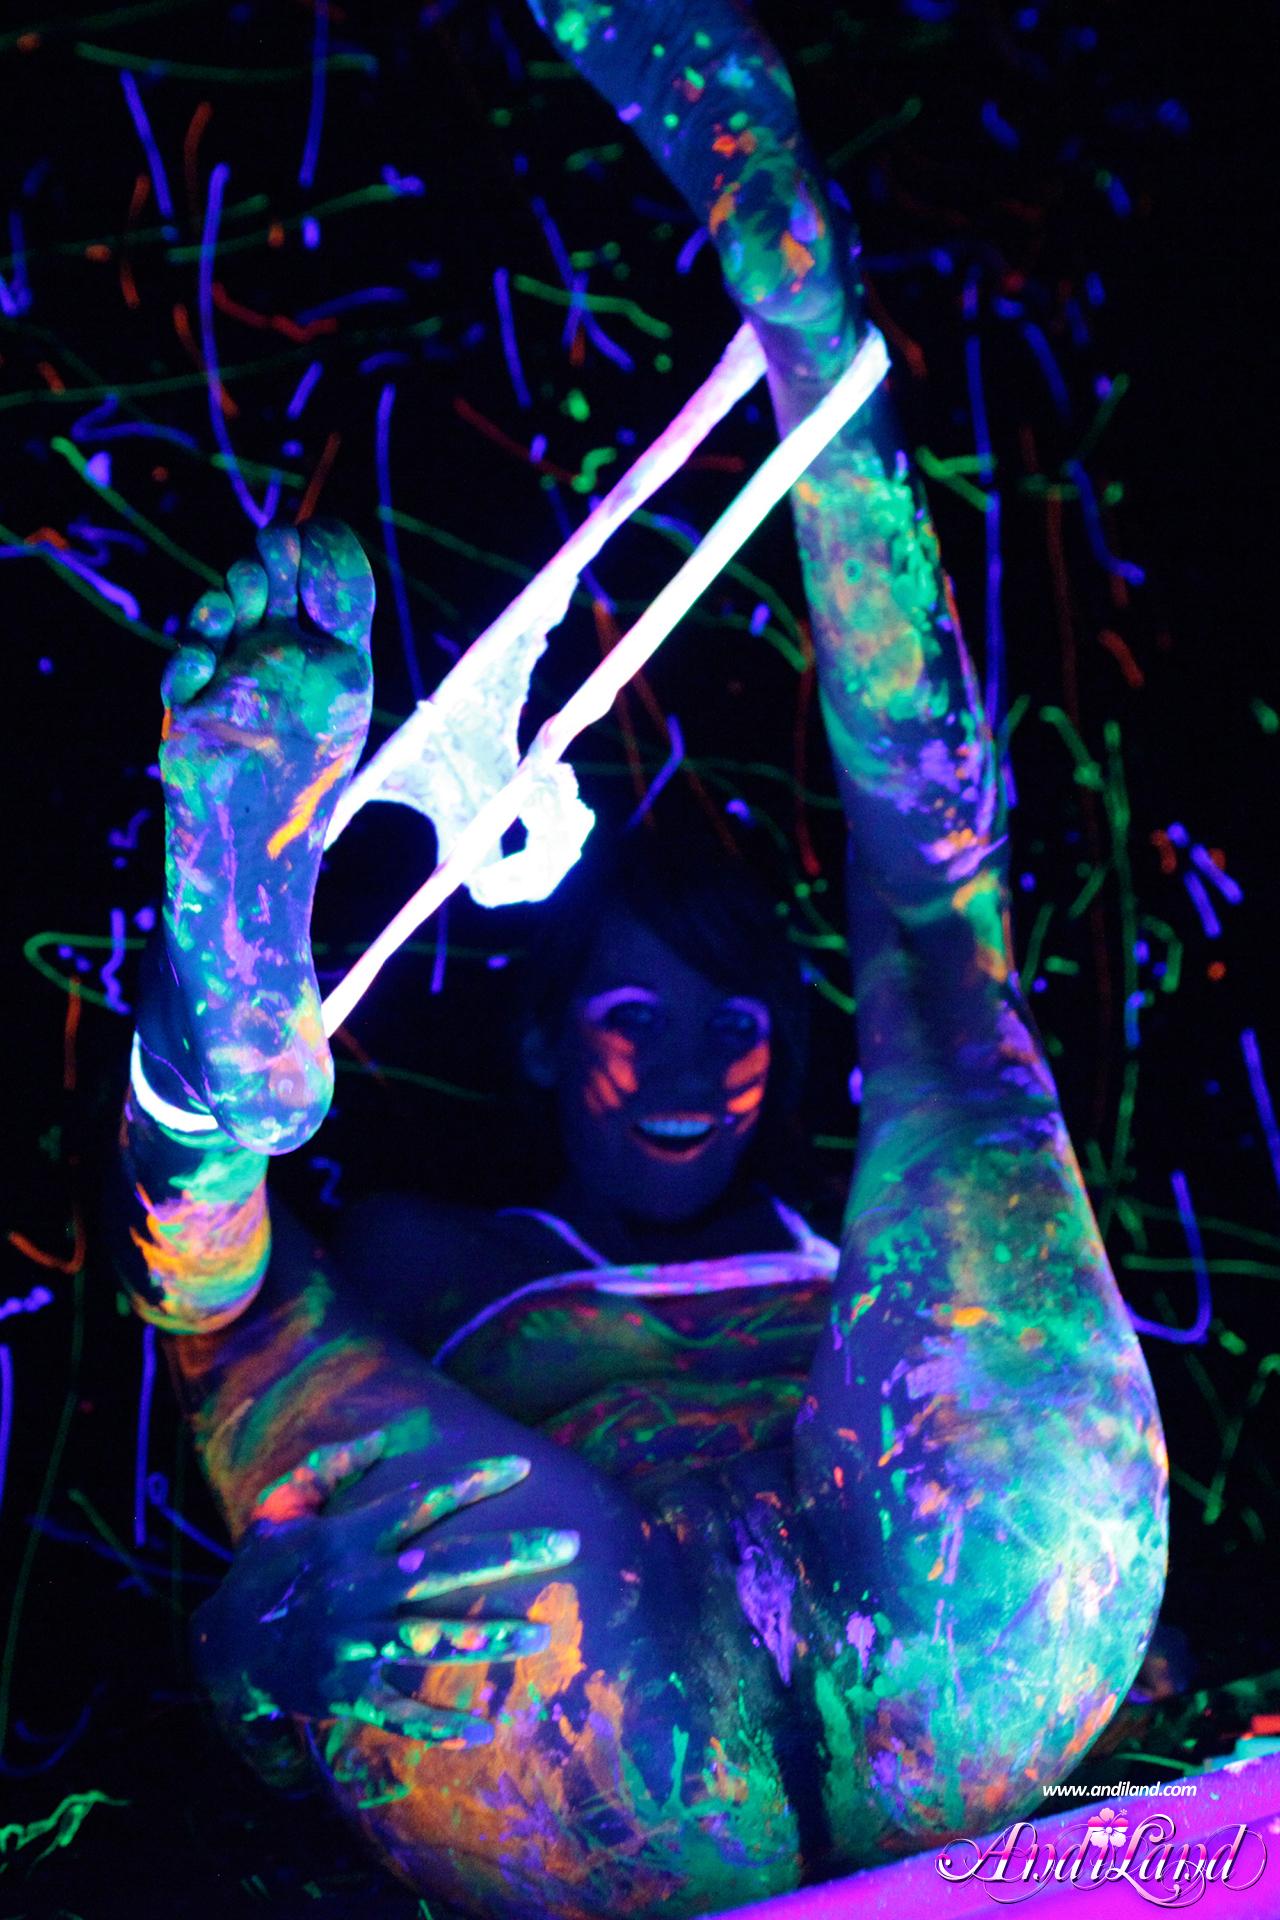 Andi Land gets super kinky with the black light and neon body paint #53134498